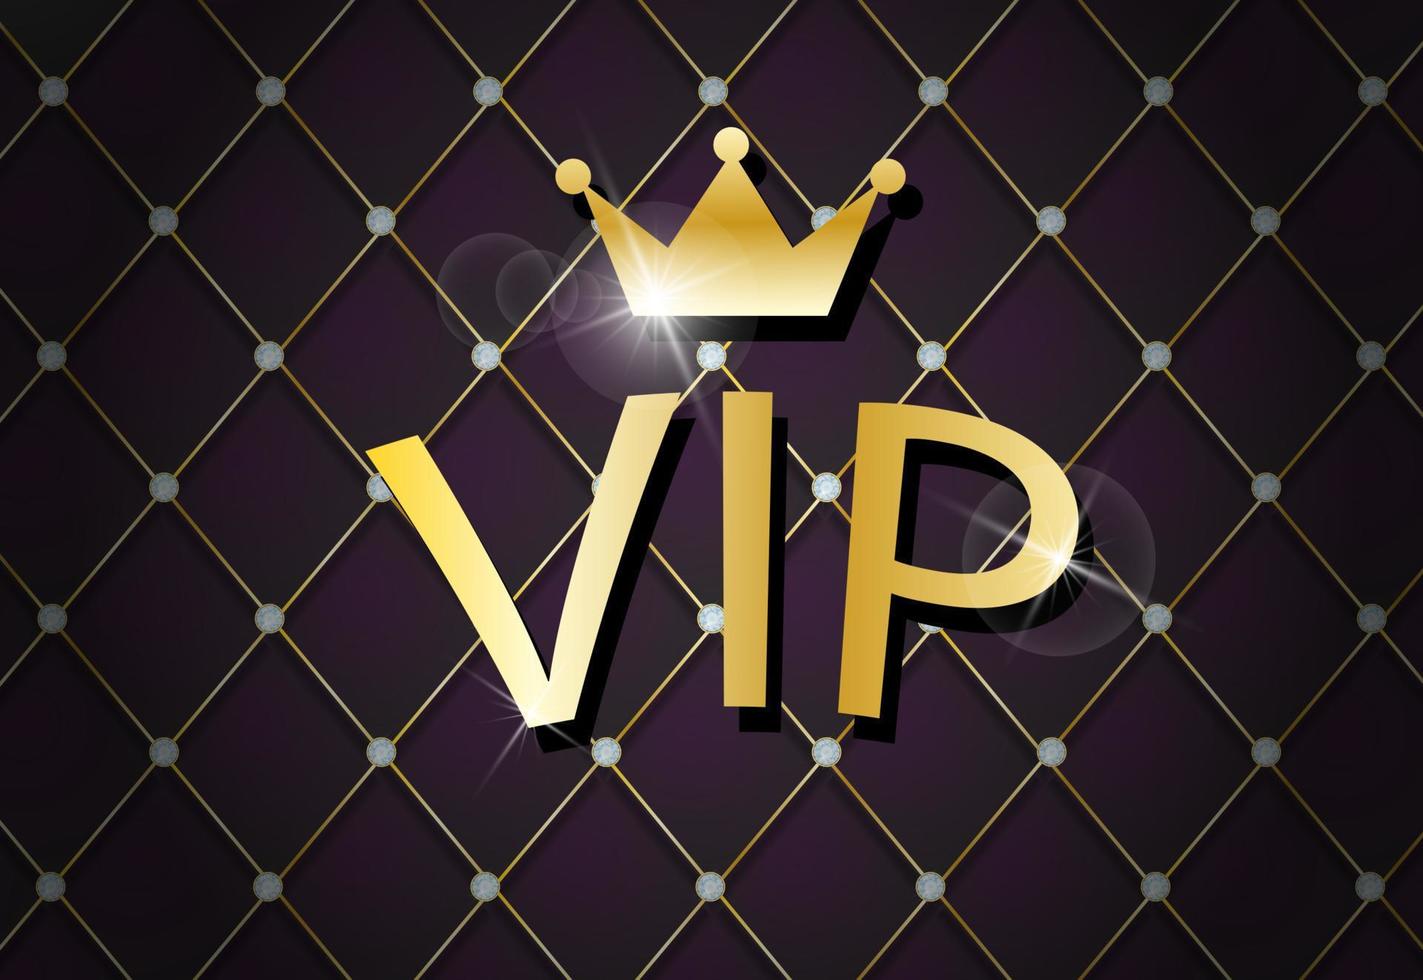 VIP abstract quilted background, diamonds and gold letters with crown. vector